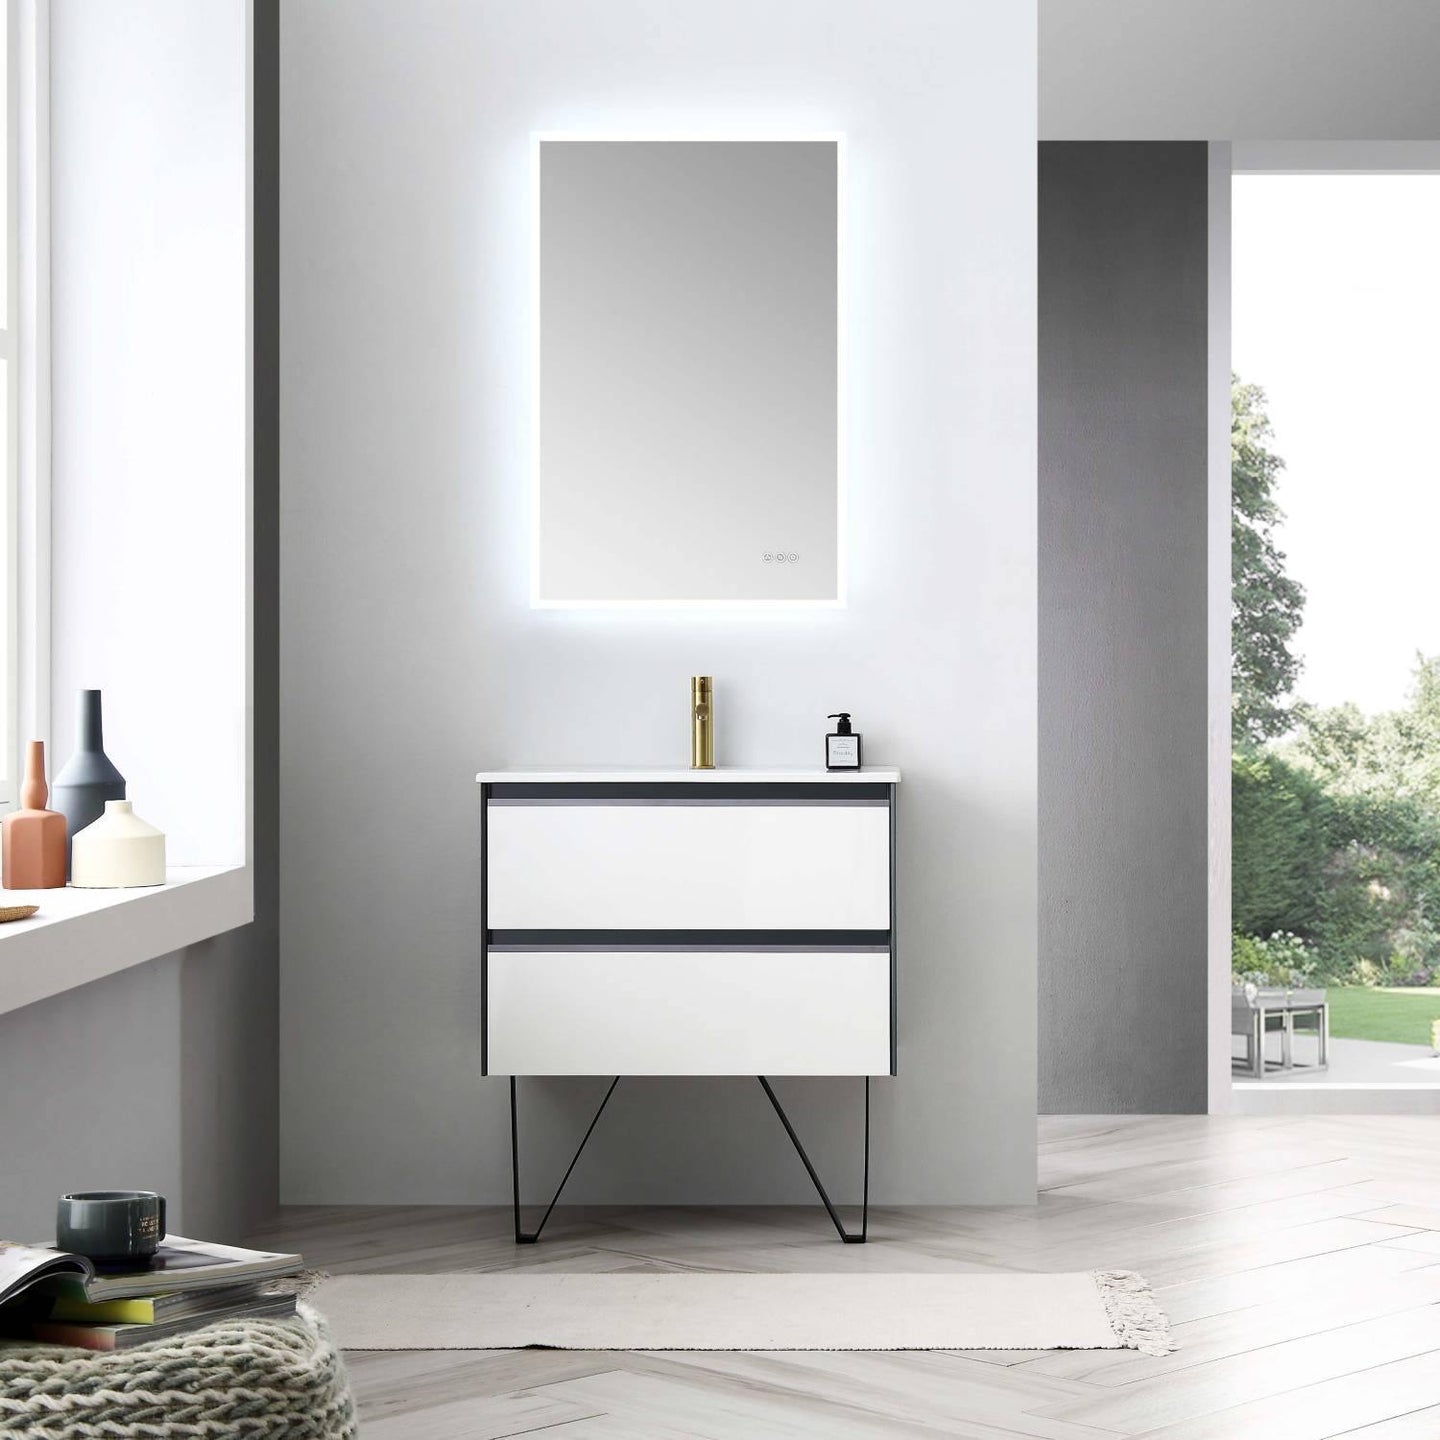 Blossom Berlin 30 Inch Vanity Base in White. Available with Acrylic Sink - The Bath Vanities